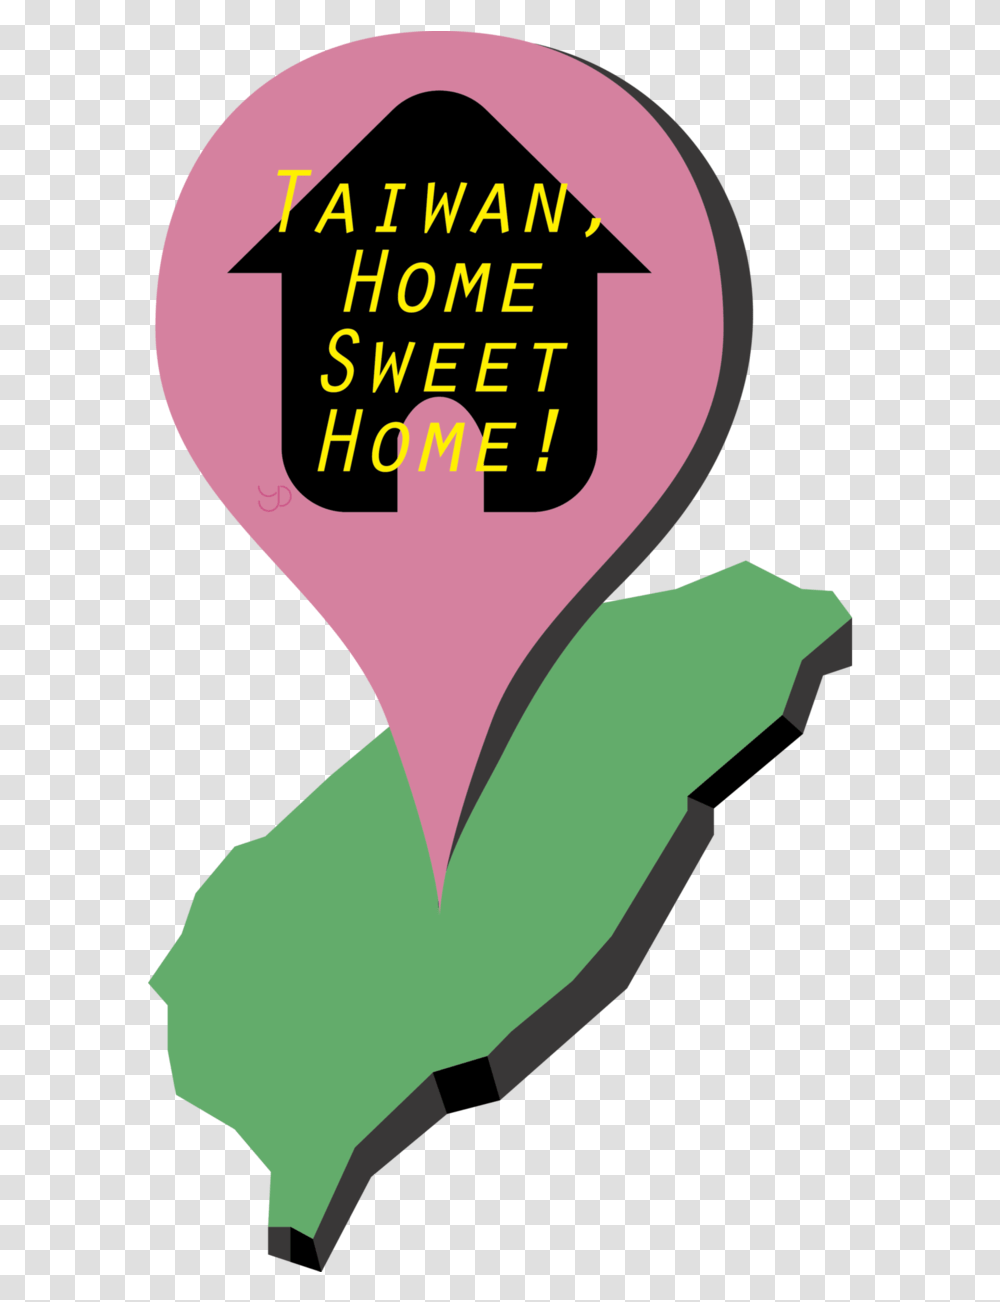 Taiwan Home Sweet Home Poster, Light, Advertisement Transparent Png